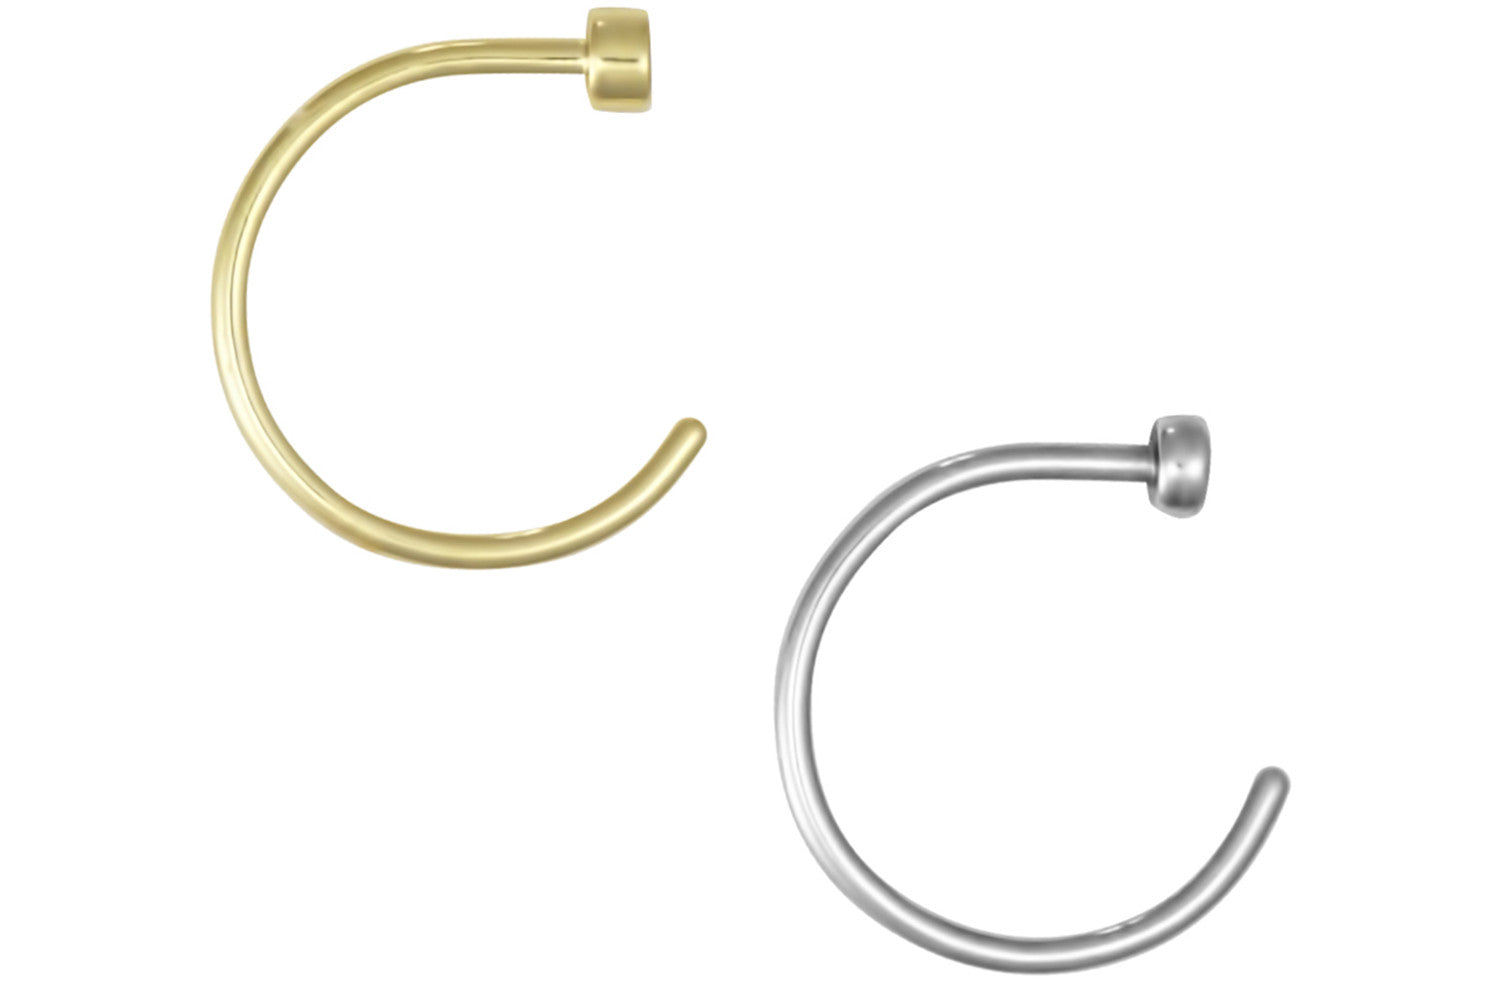 This set of nose hoops is made with surgical grade 316L stainless steel & Yellow Gold IP plating. These hoops are 5/16" (8 mm) in diameter. This 20 gauge nose jewelry is hypoallergenic and lead & nickel free.